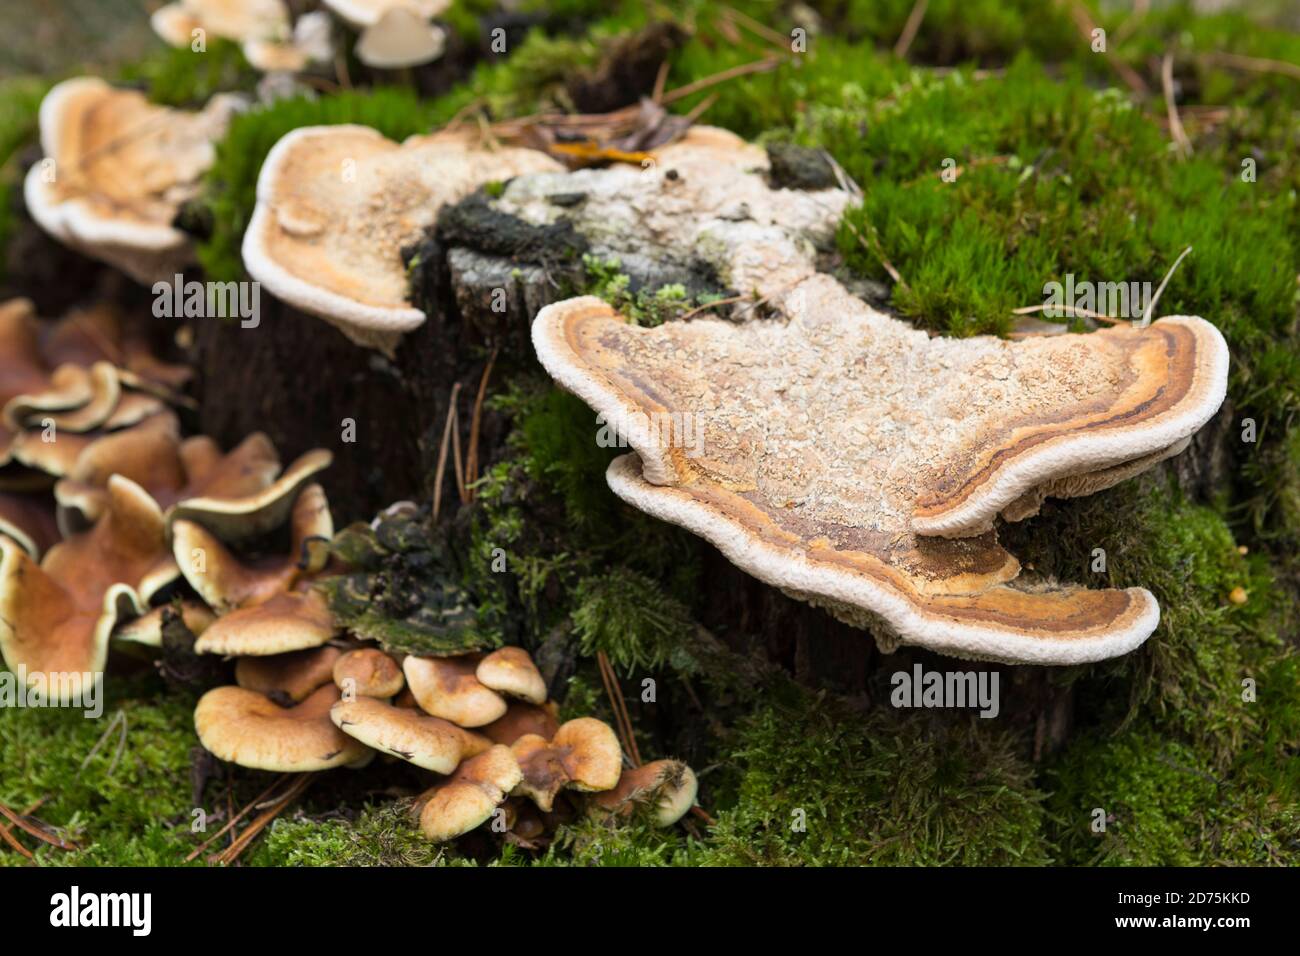 Big mushrooms growing at a tree stump with moss in Europe Stock Photo